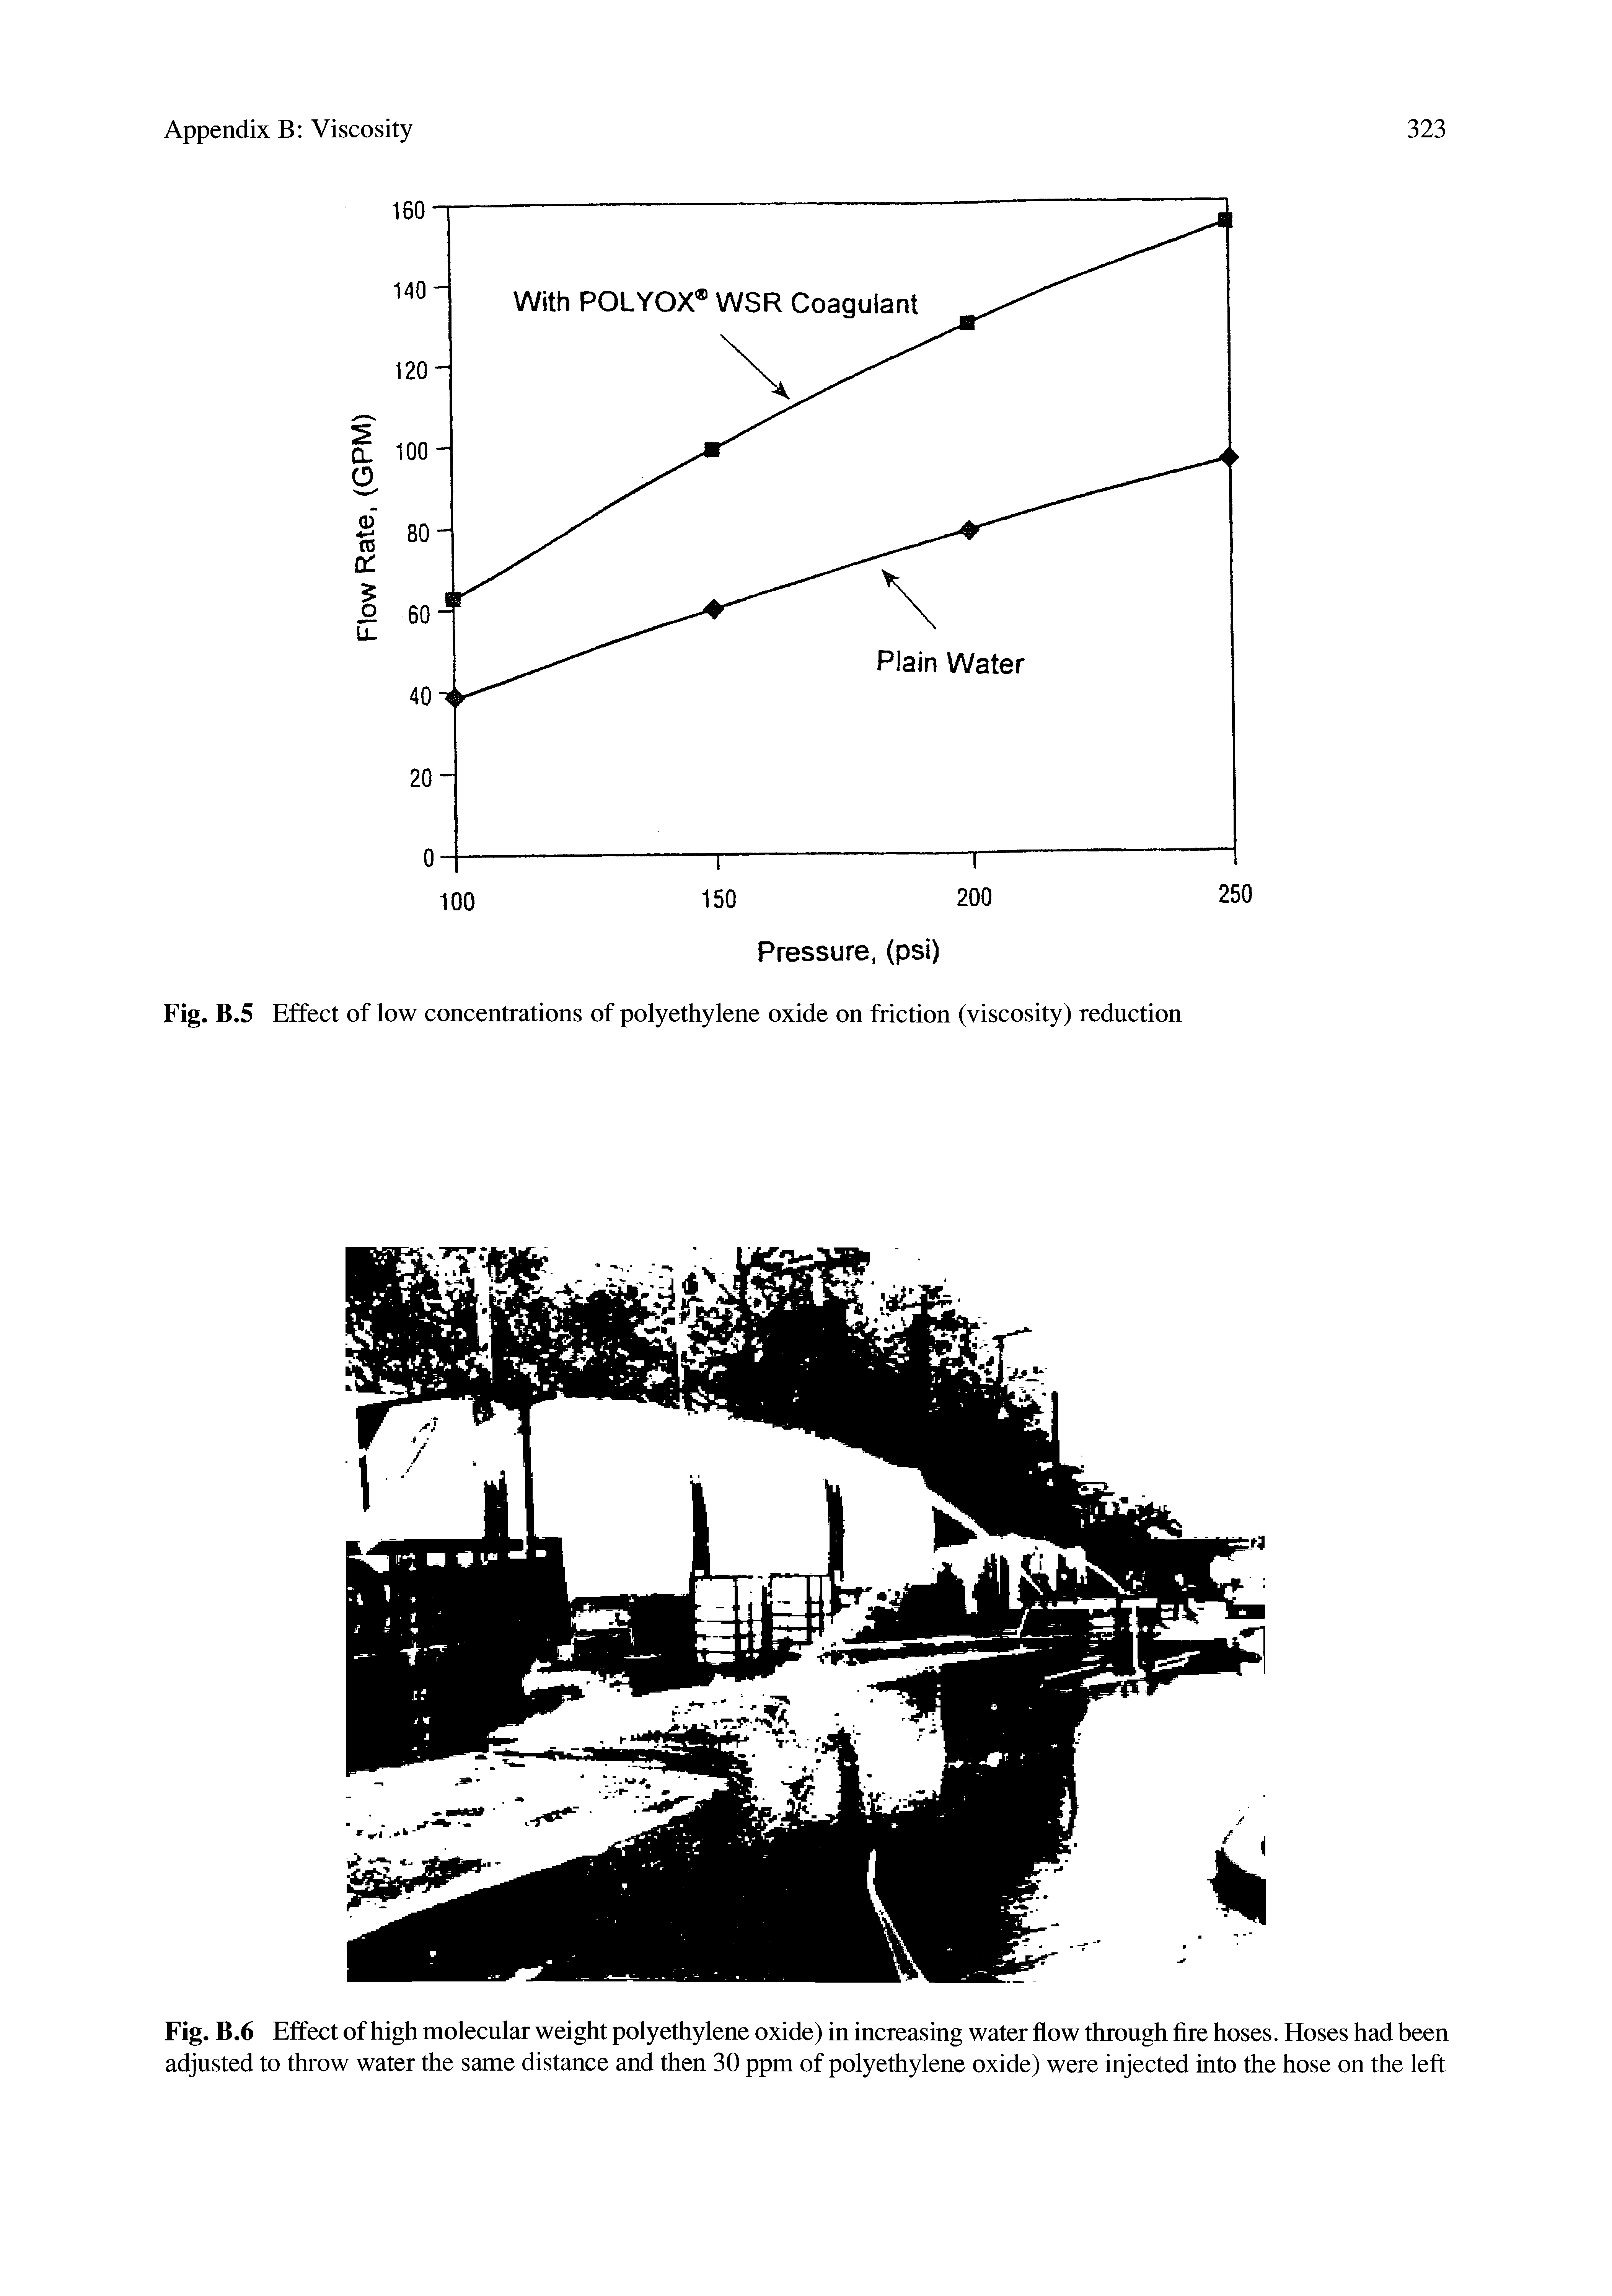 Fig. B.6 Effect of high molecular weight polyethylene oxide) in increasing water flow through fire hoses. Hoses had been adjusted to throw water the same distance and then 30 ppm of polyethylene oxide) were injected into the hose on the left...